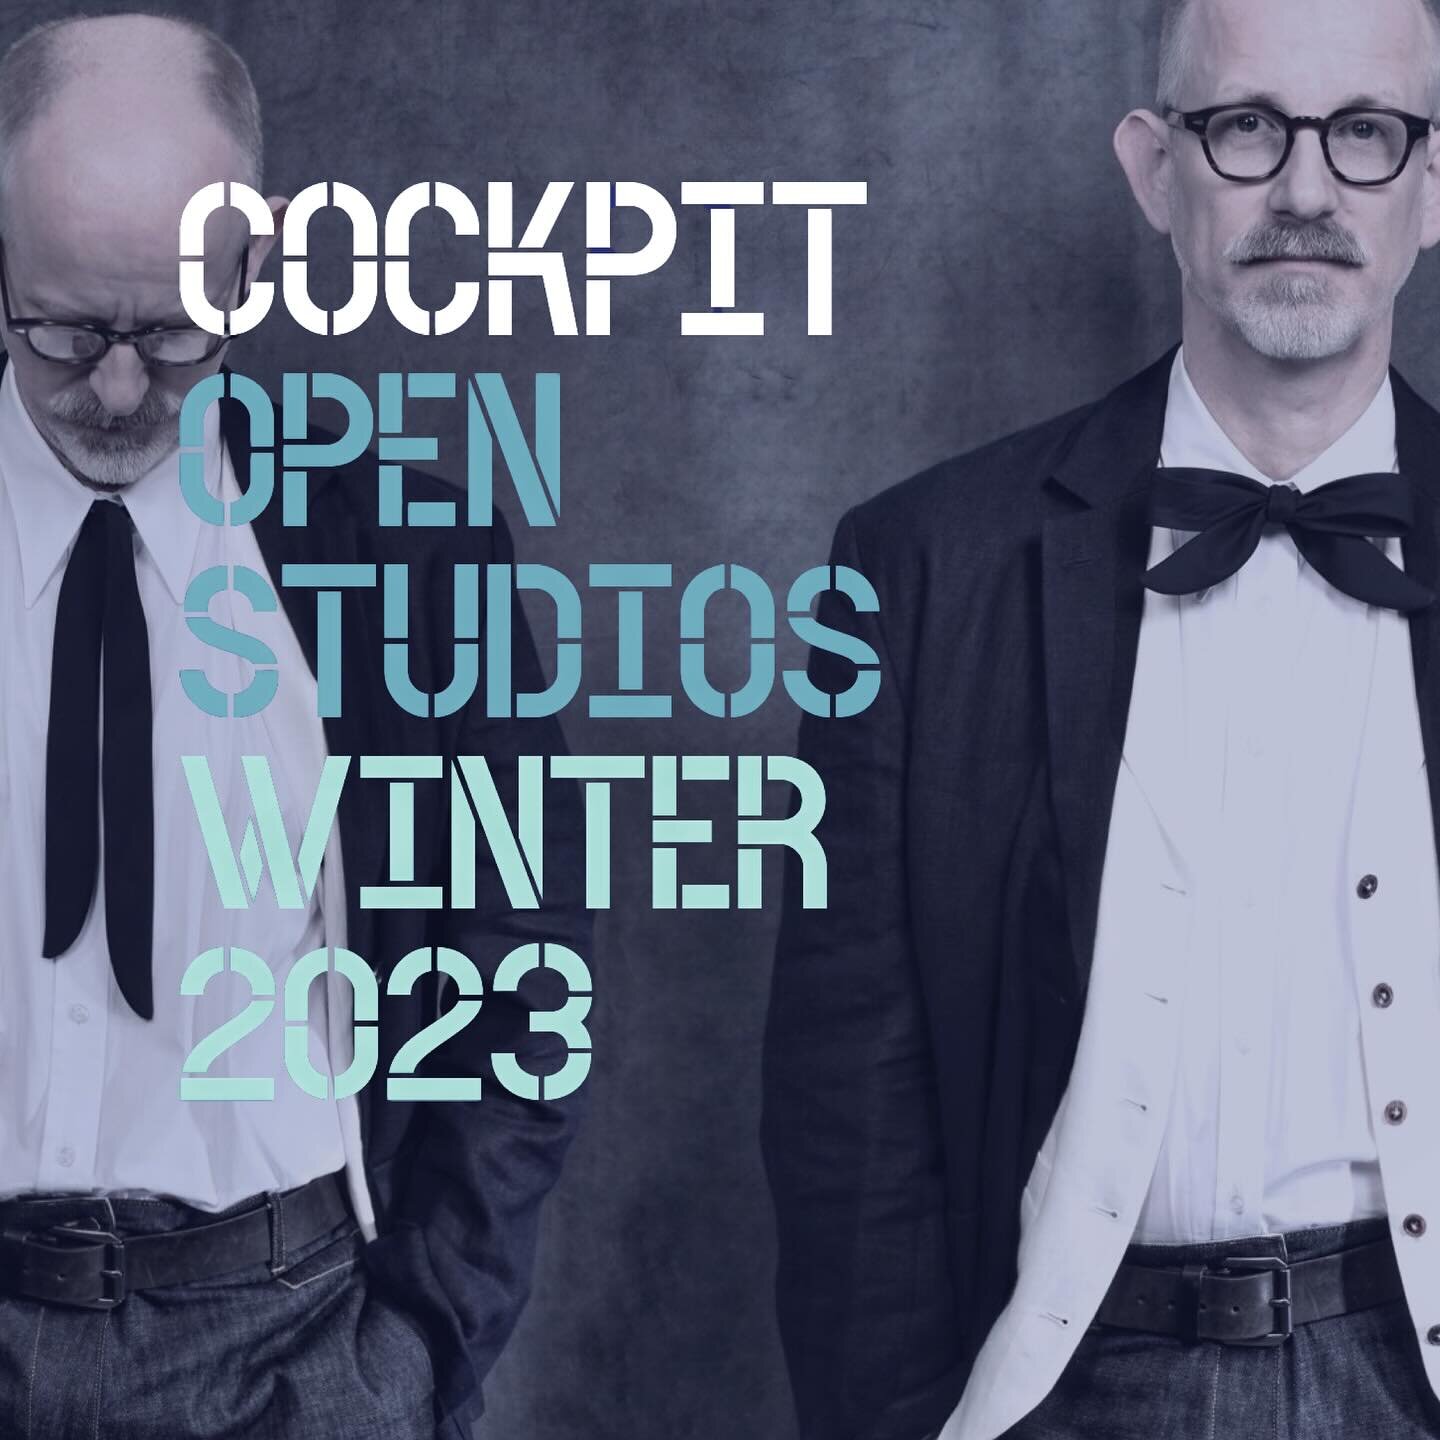 Book your tickets for
WINTER 23
OPEN STUDIO

SHOP TO ORDER
Exclusives from our new spring 24 collection are available for advance orders&hellip;

Or have a unique piece commissioned Through our MADE BY REQUEST service 

Alternative 
Buy someone a GIF